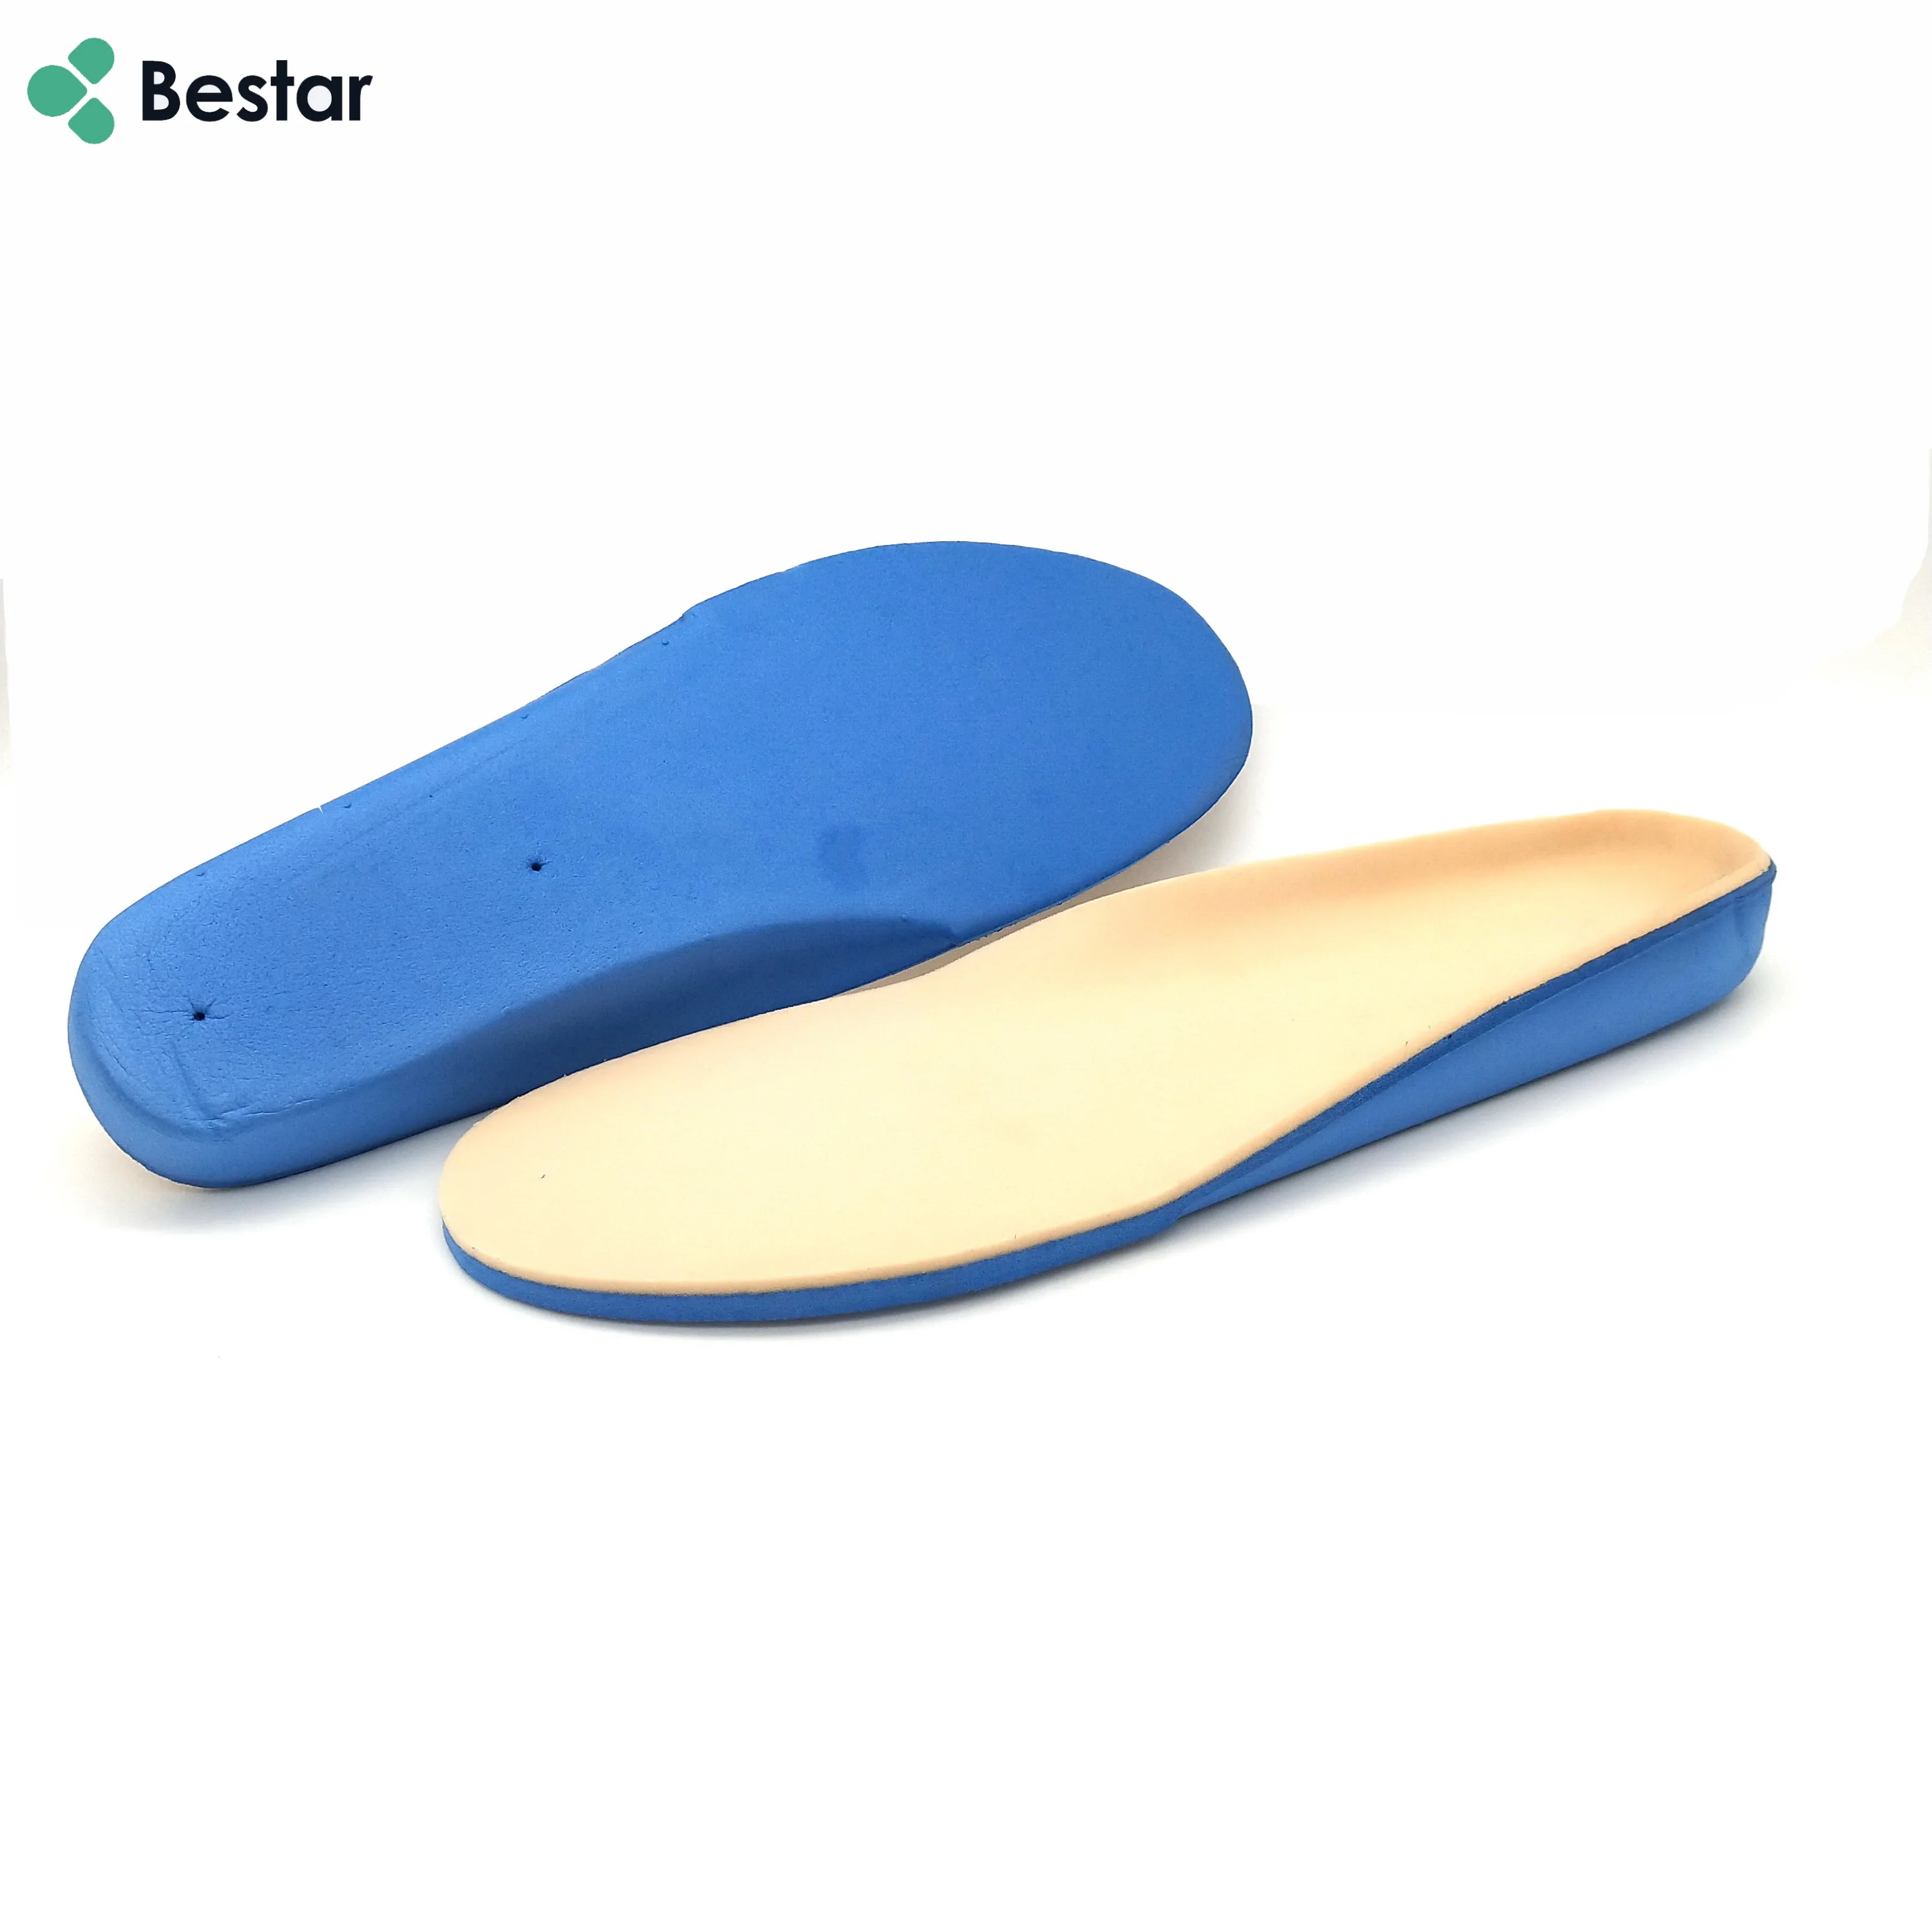 

diabetic eva insole removable pegs foot pain surgery insoles for unheal foot ulcer medical insoles diabetes, Photo color